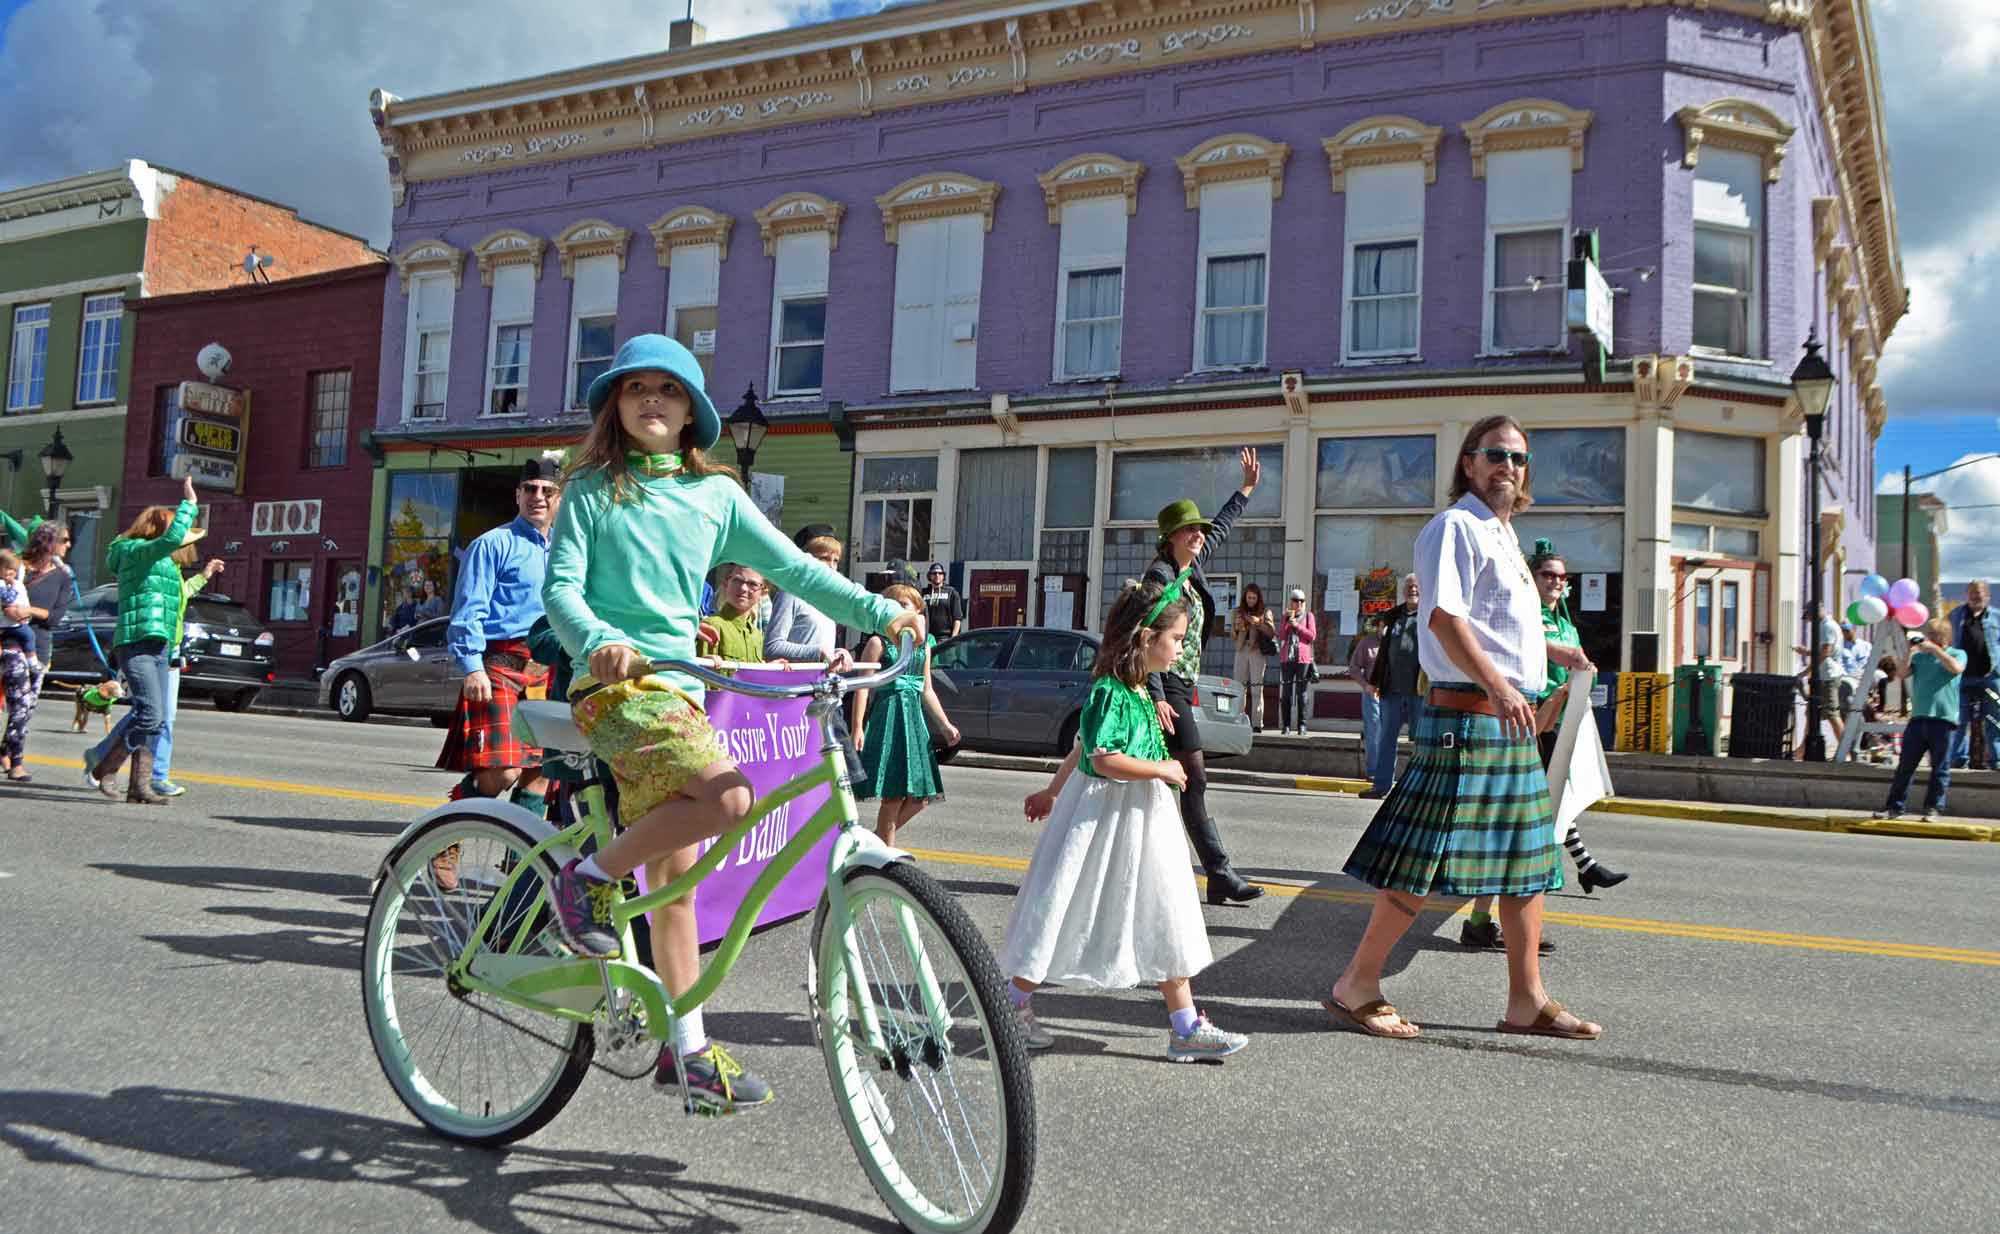 St Patrick's Day Parade in Leadville Colorado